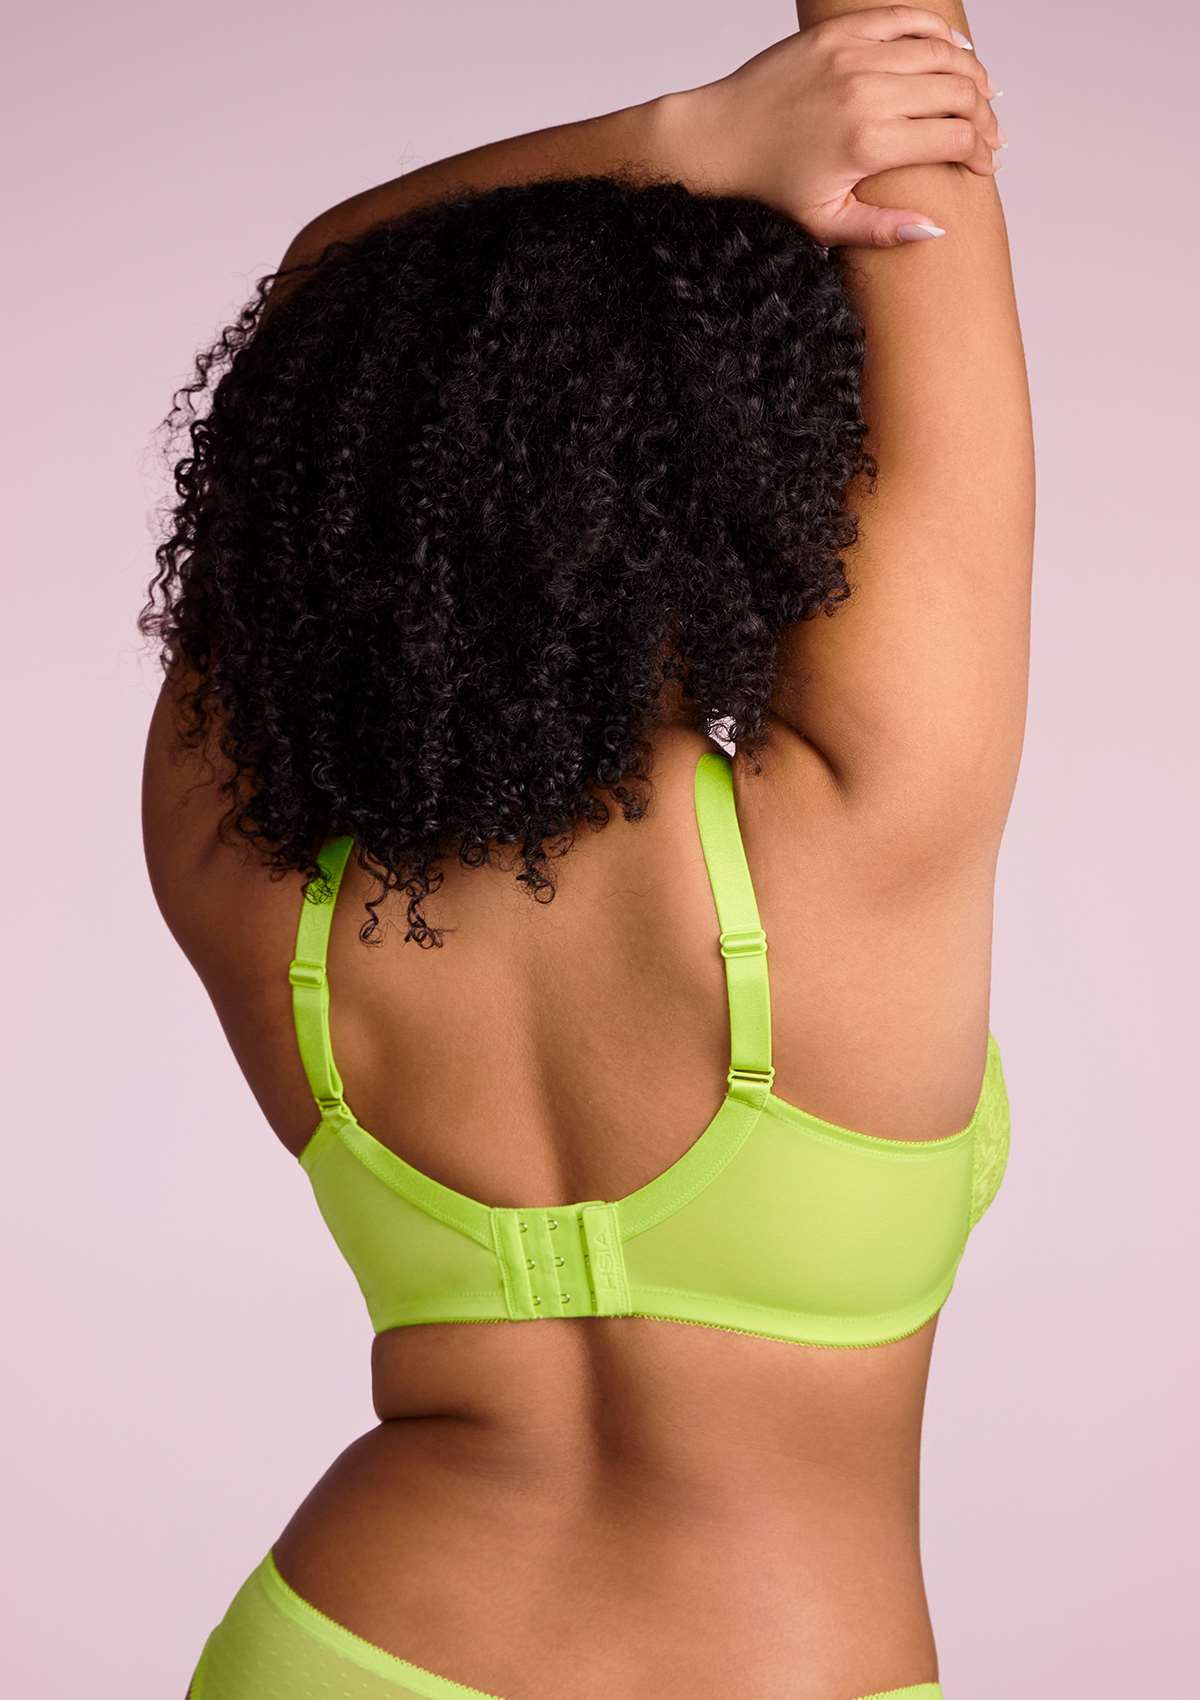 HSIA Enchante Full Cup Minimizing Bra: Supportive Unlined Lace Bra - Lime Green / 34 / H